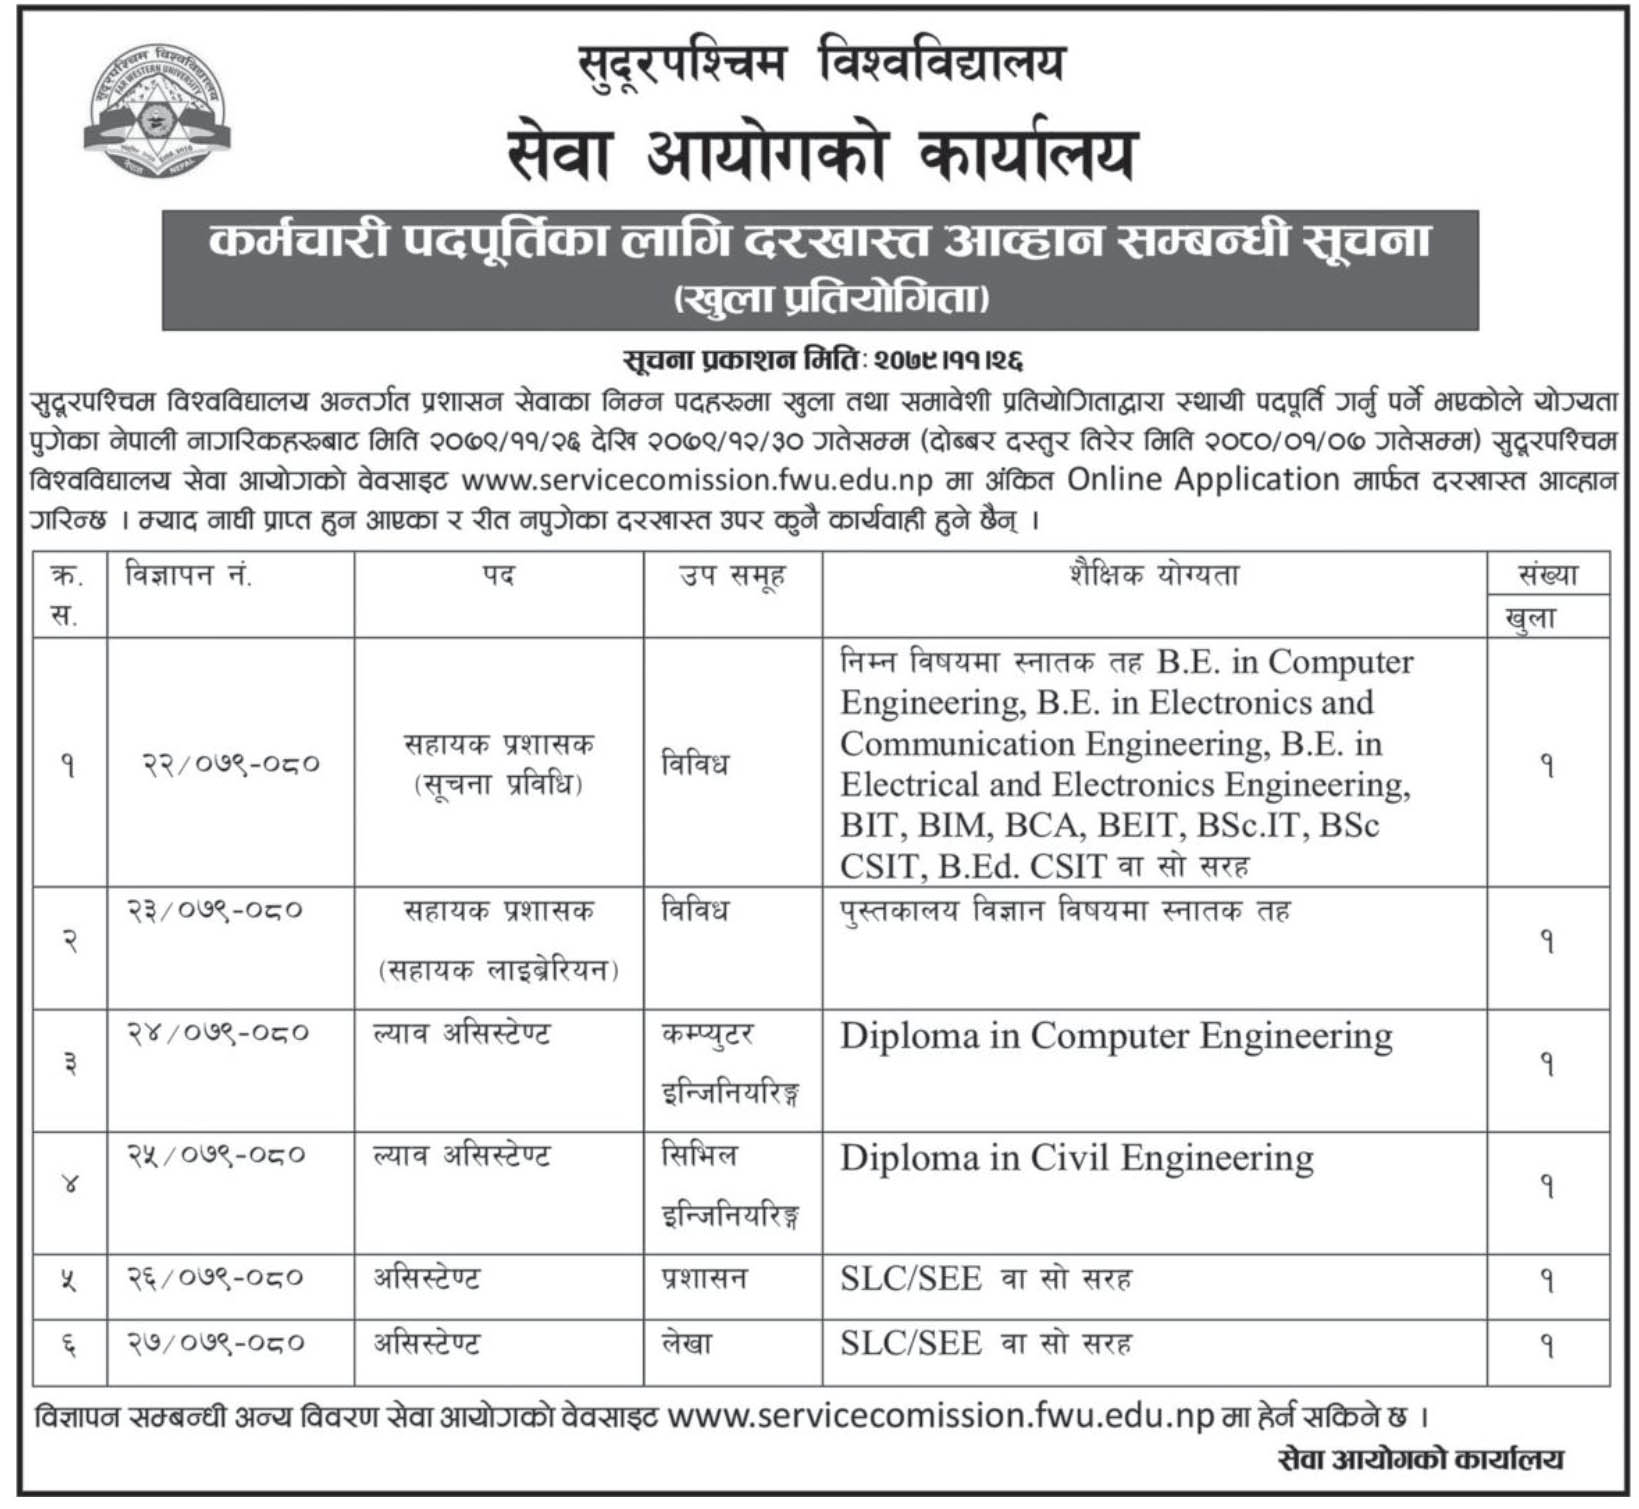 Sudurpaschim University Bigyapan 2079: Sudurpaschim University Service Commission has opened job vacancy applications for permanent posts through open and inclusive competition for various administrative service posts.